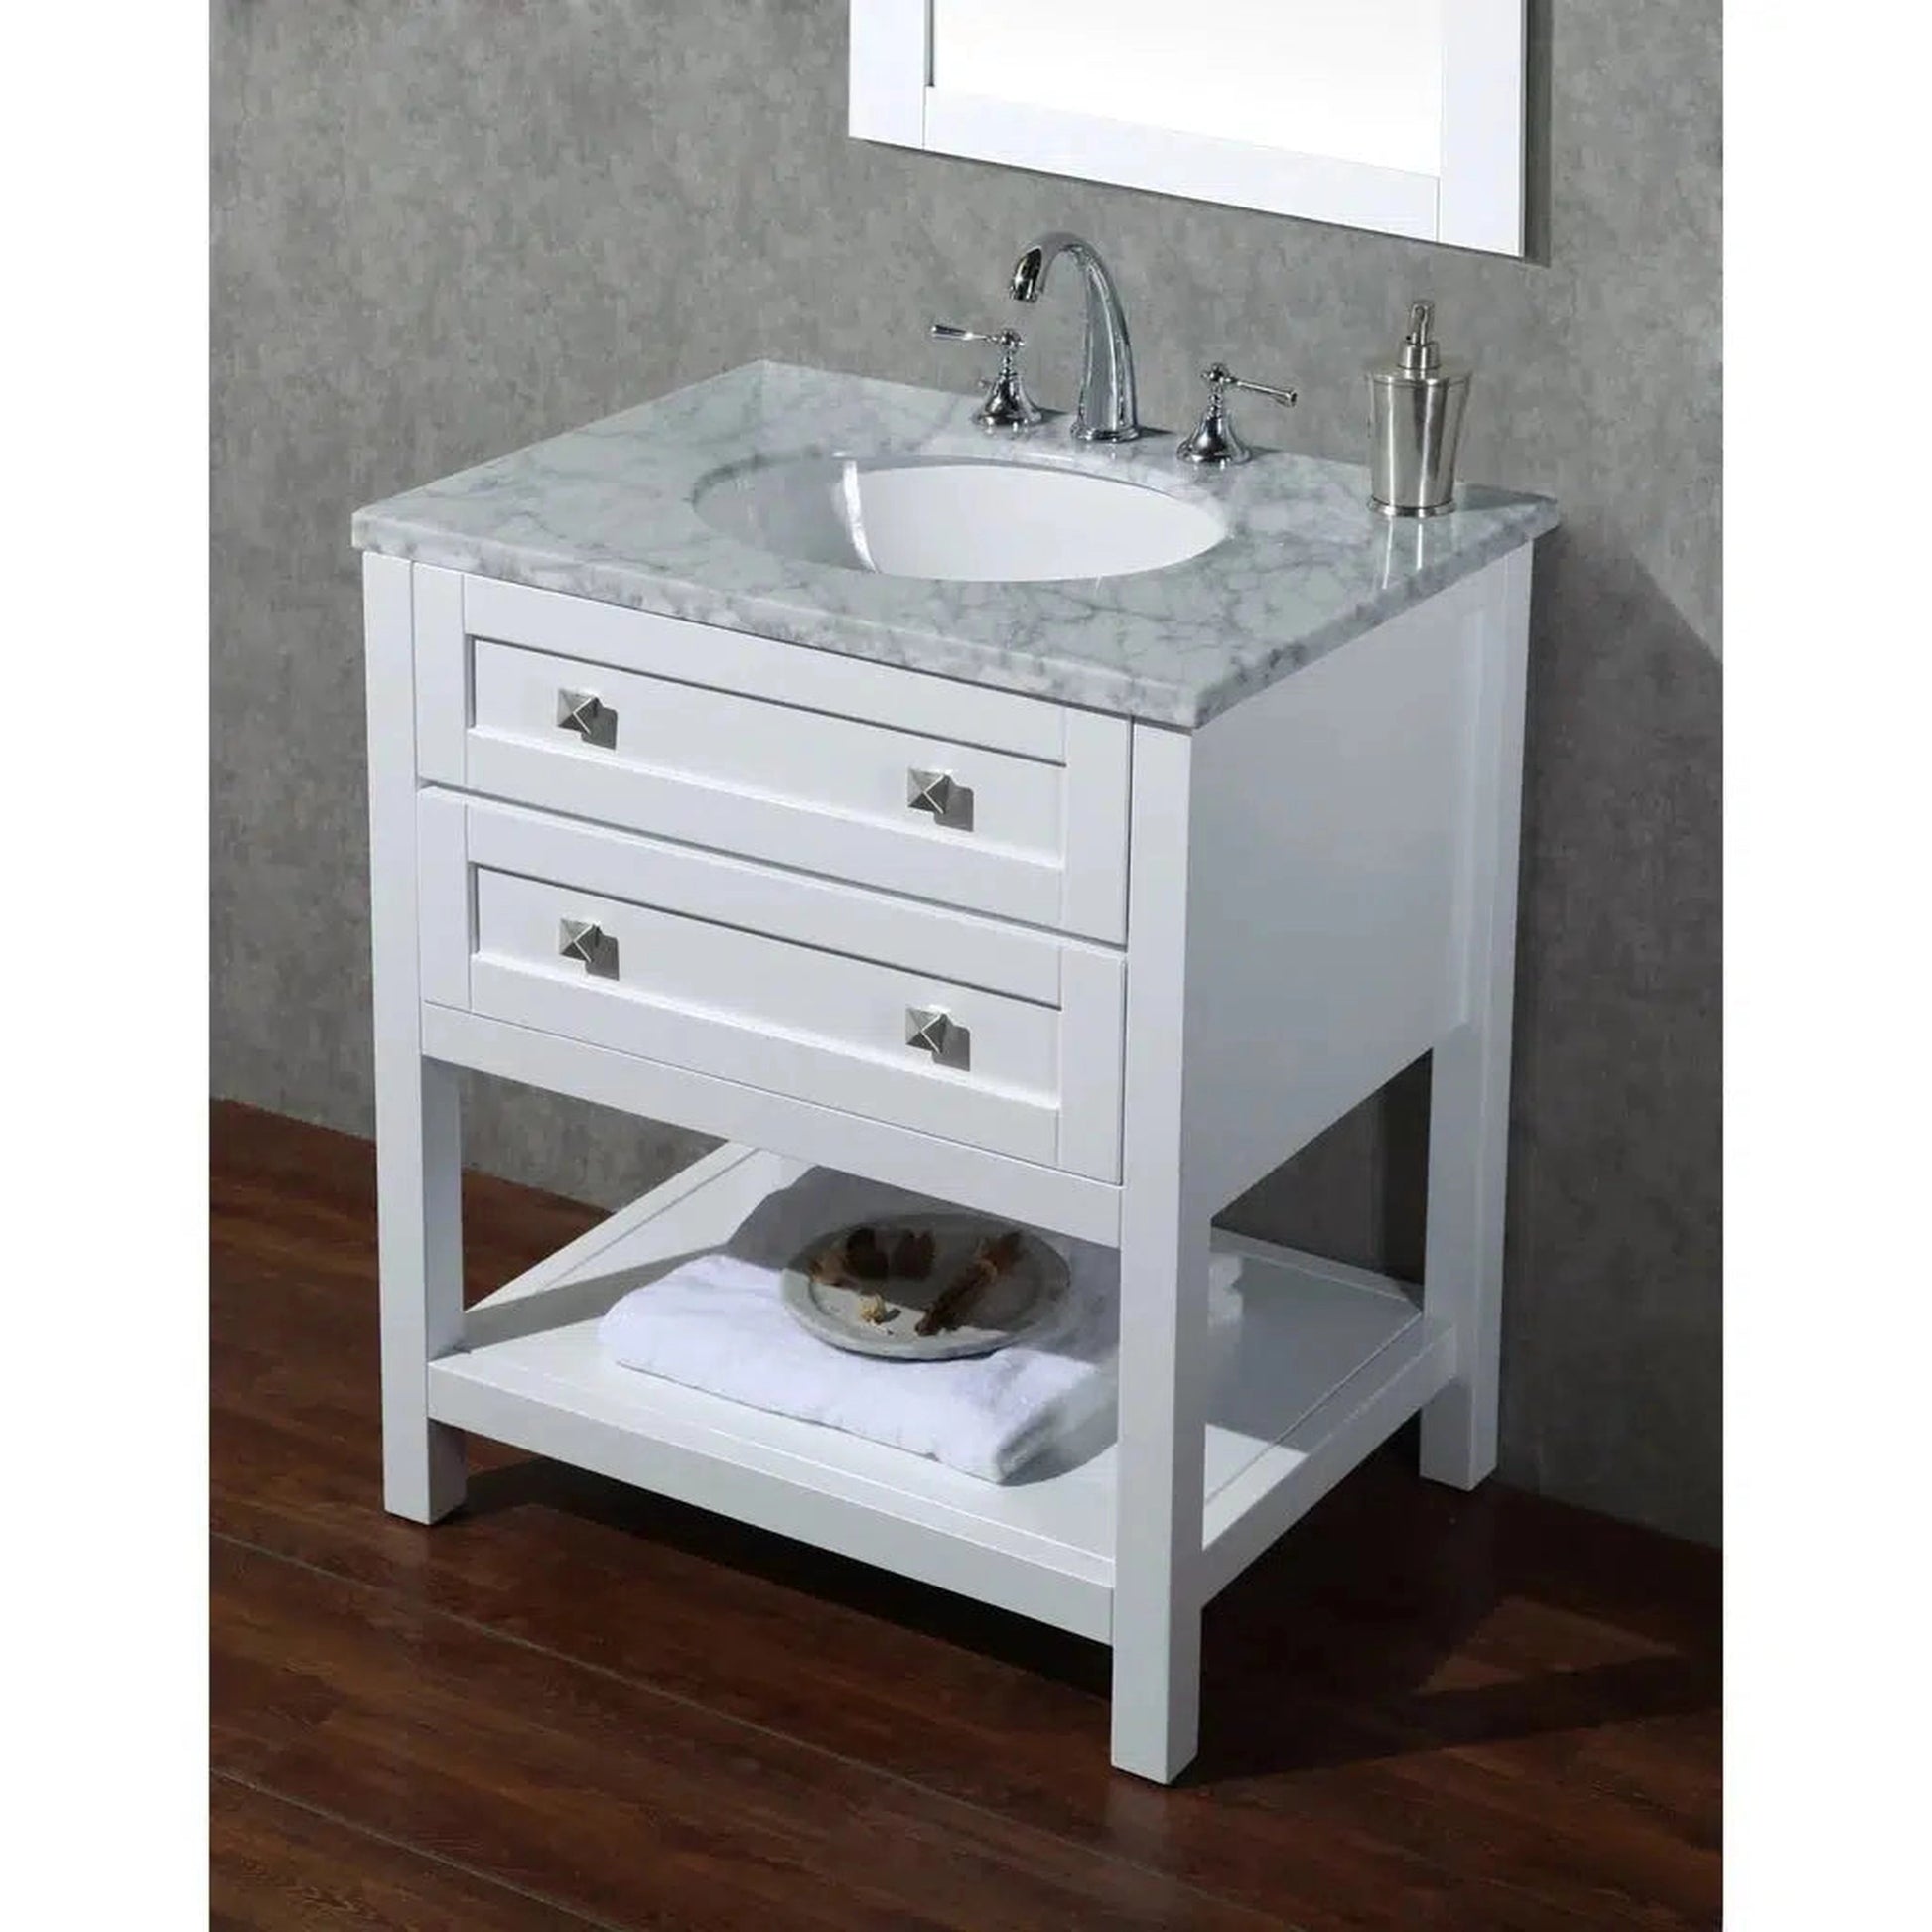 Stufurhome Marla 30" White Freestanding Bathroom Vanity with Oval Single Undermount porcelain basin, Carrara White Marble Top, Wood Framed Mirror, 2 Drawer and Widespread Faucet Holes